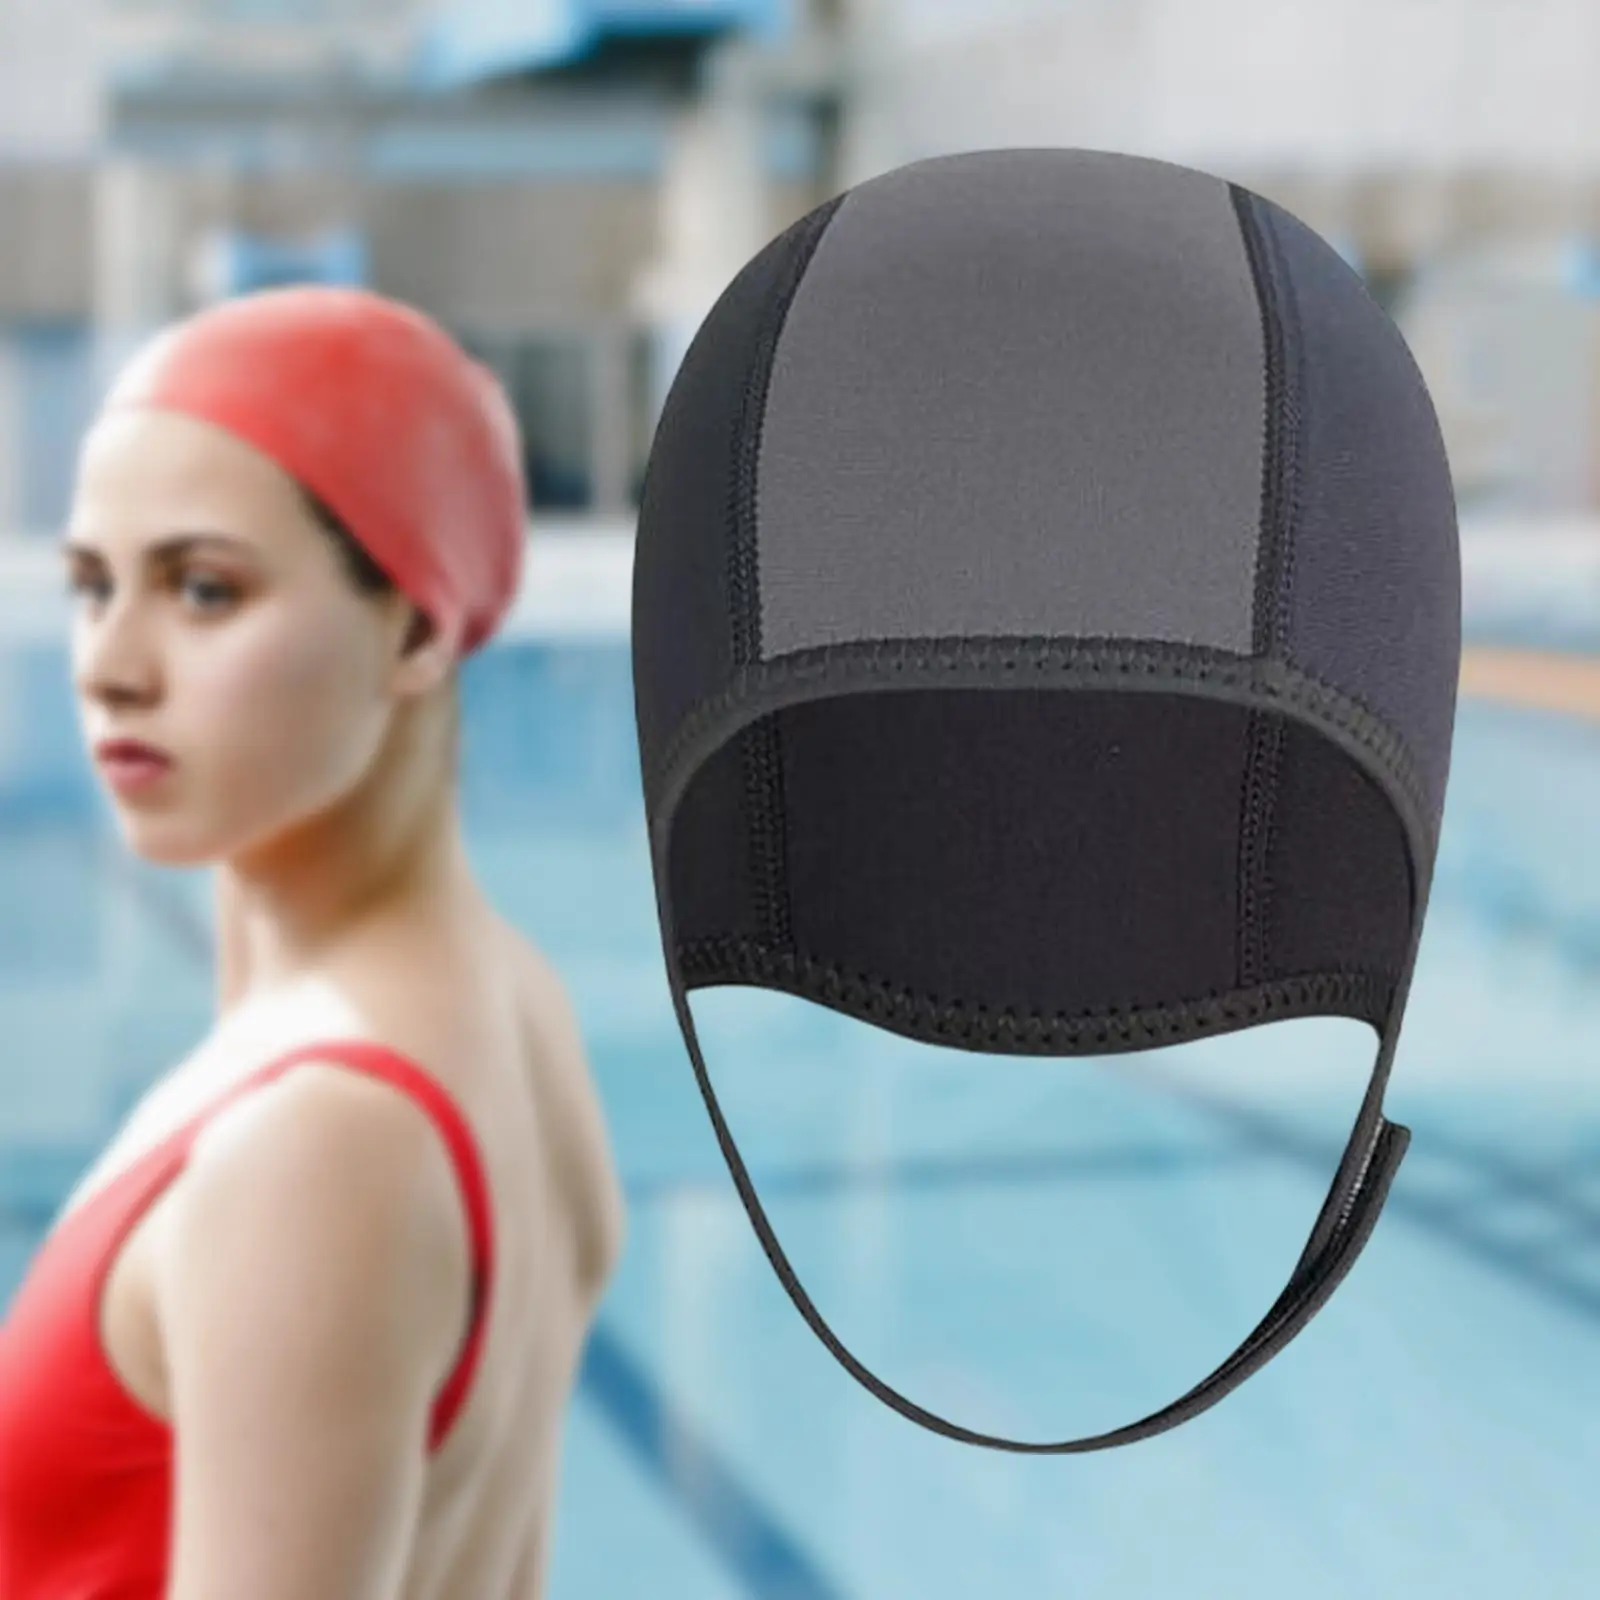 Thermal Diving Hood Keep Warm Head Protection Hat Equipment Full Face Mask Suit for Surfing Bathing Women Water Sports Fishing